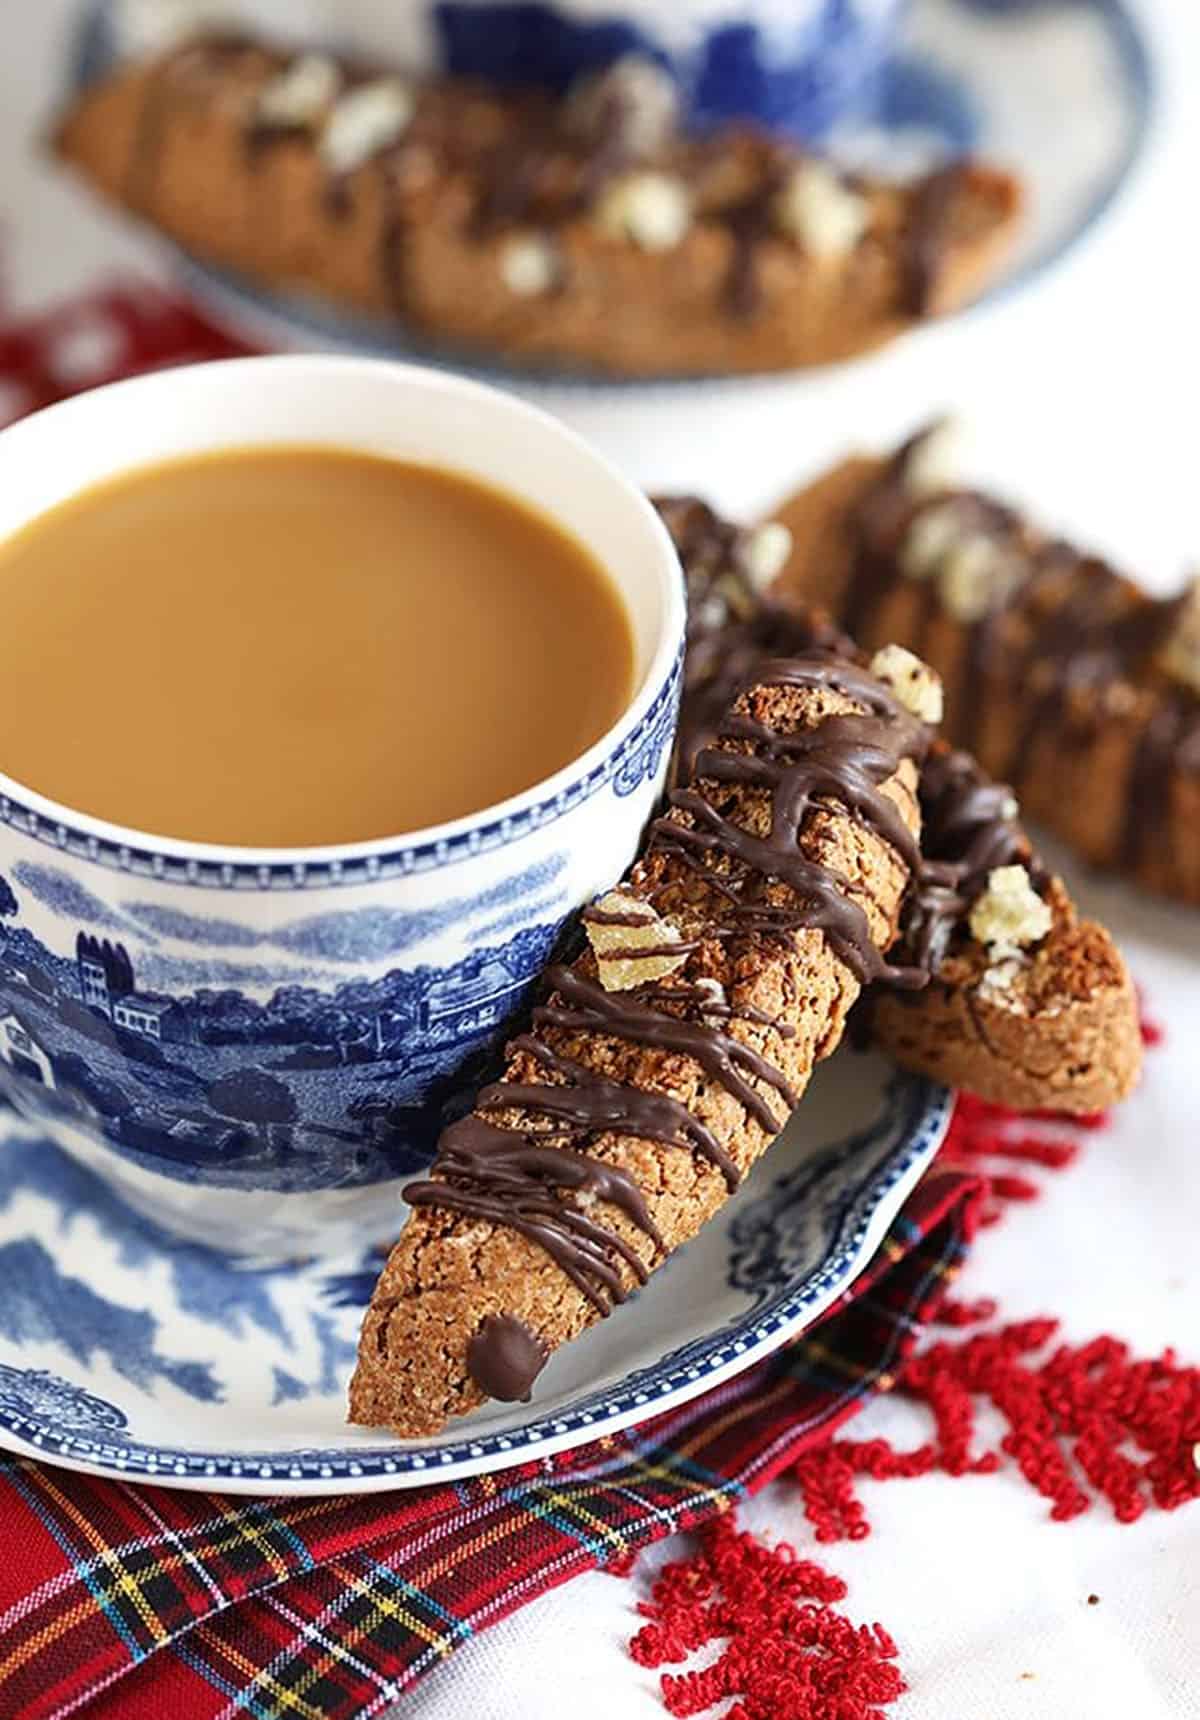 Gingerbread Biscotti on the side of a saucer with a cup of coffee.